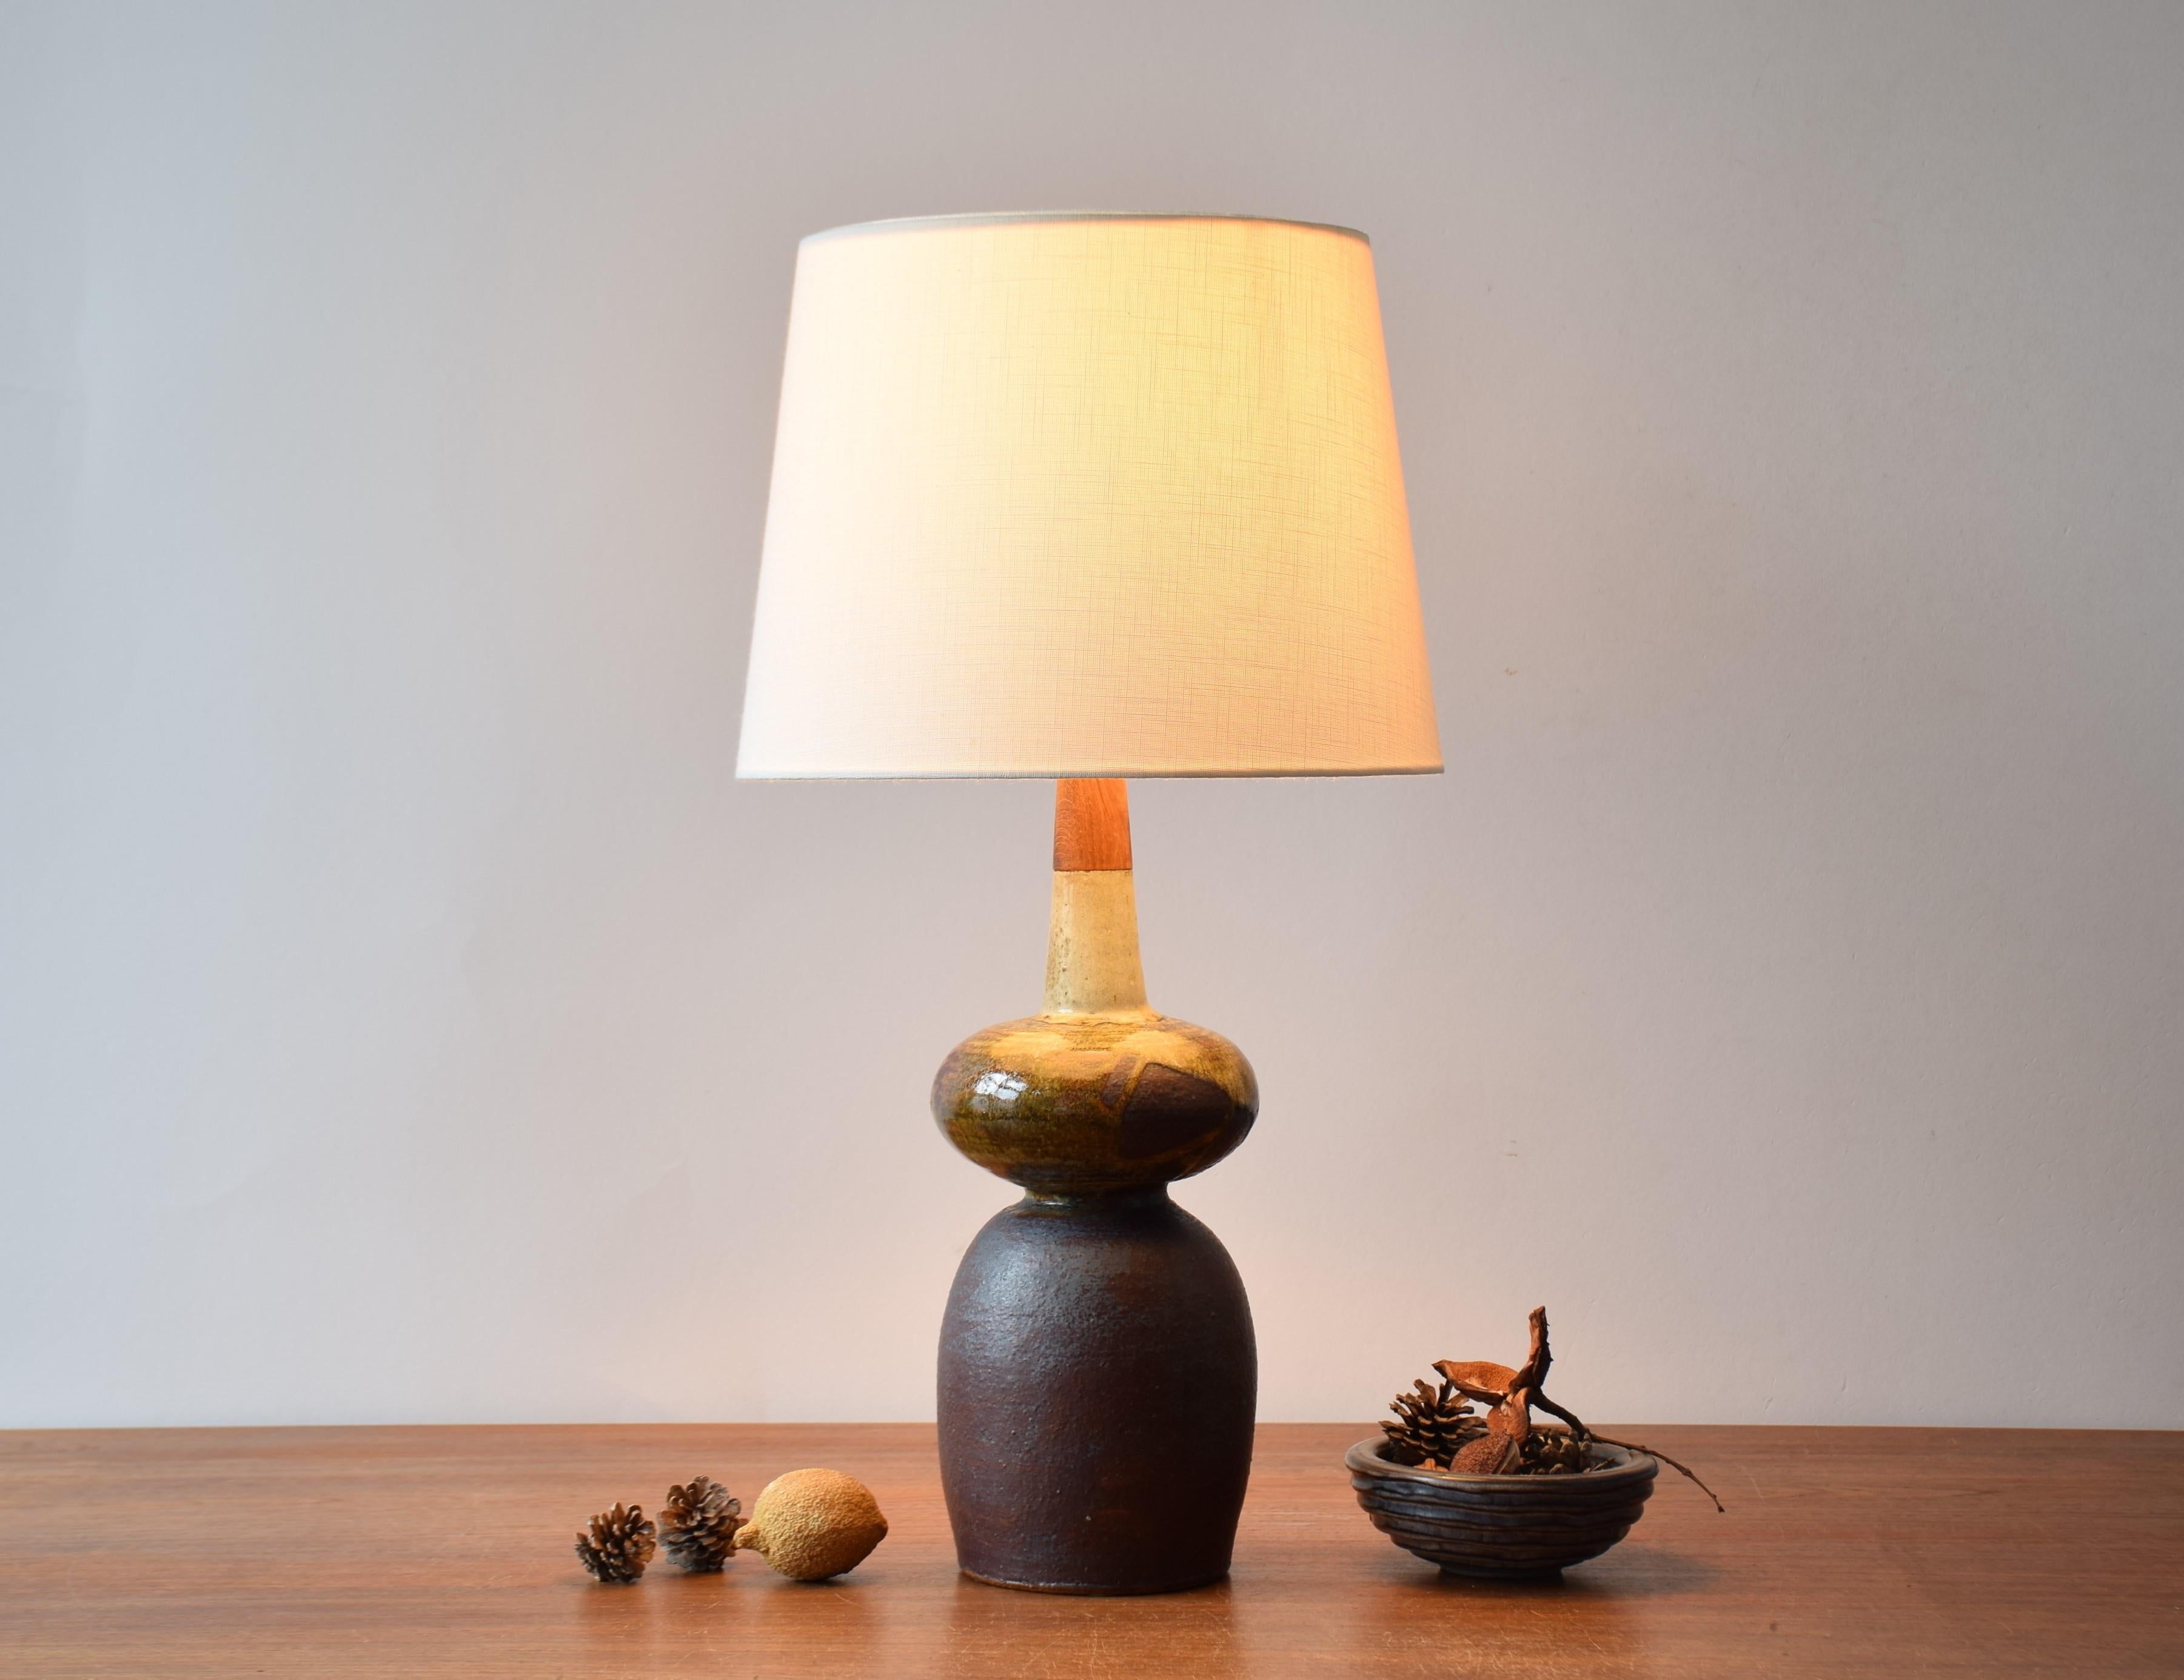 Unique Mid-century Danish studio pottery table lamp by ceramist Erik Graeser, made circa 1960s-1970s.
Great sculptural shape and interesting contrast between ceramic body and top made of solid teak wood. The colors are earthy brown tones.